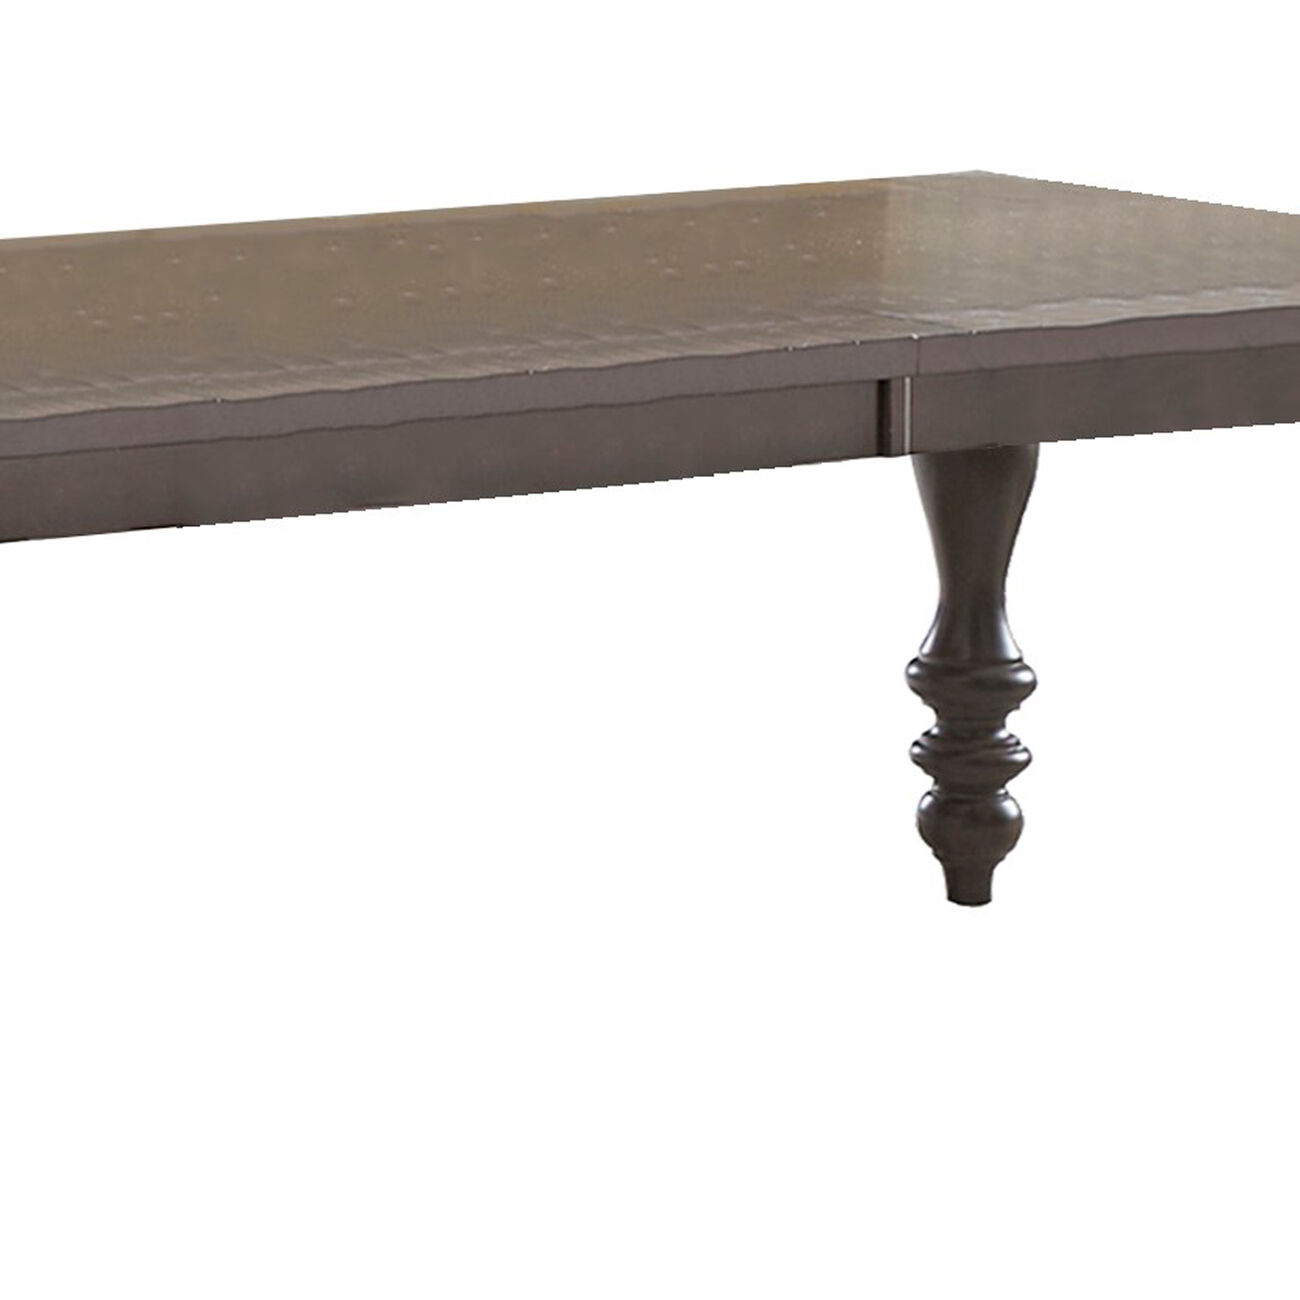 Wooden Dining Table with Molded Details and Turned Legs, Brown